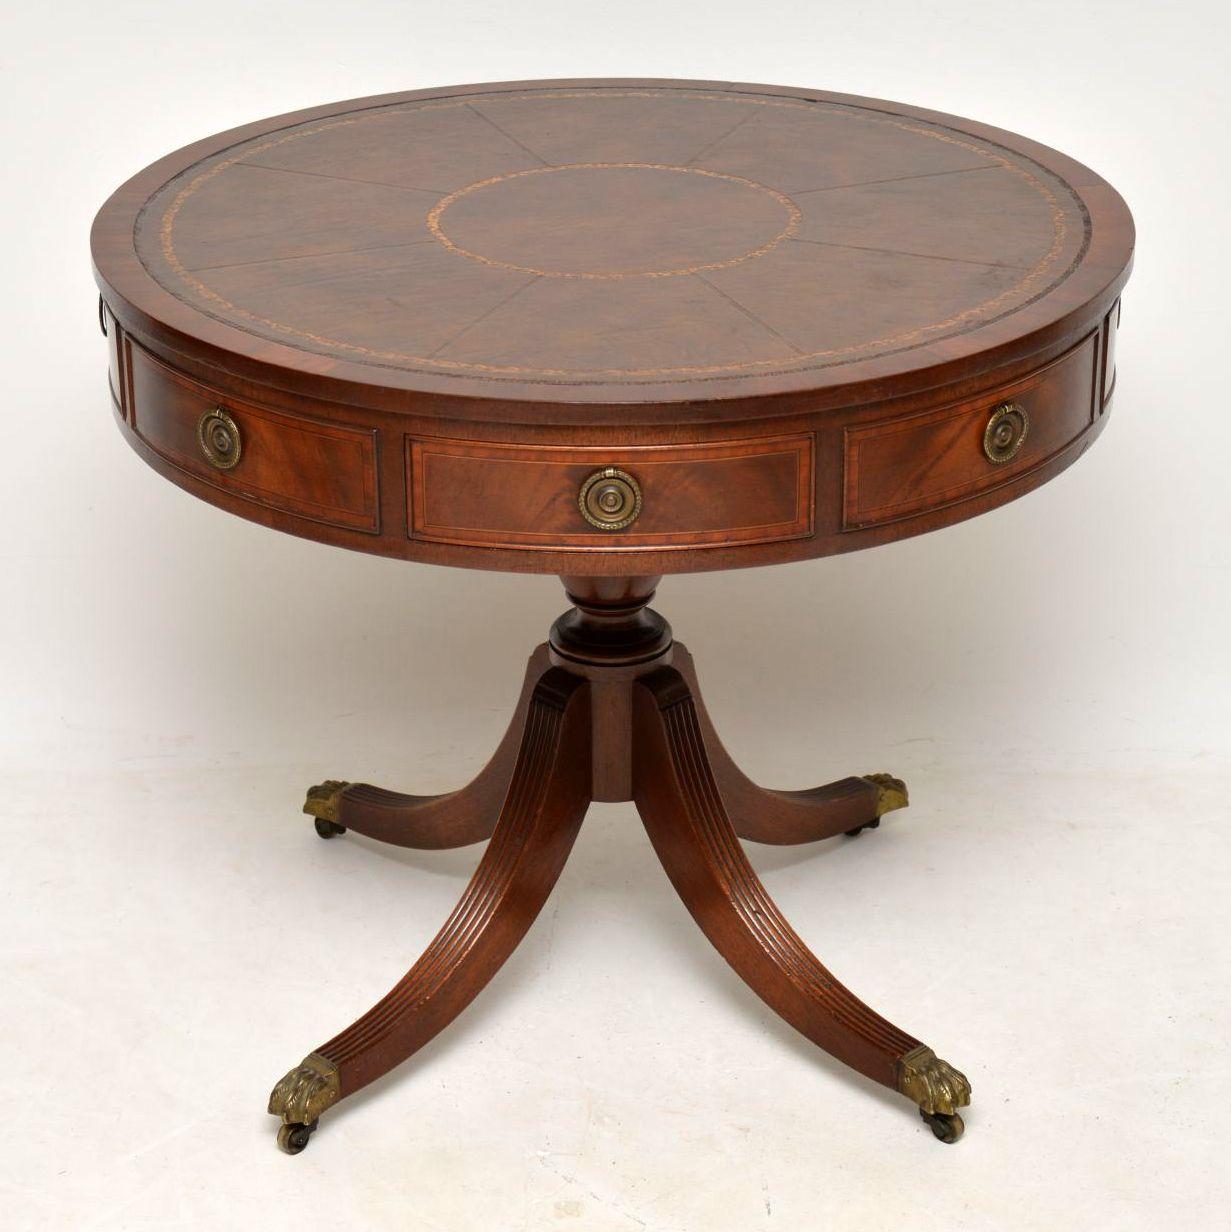 This antique leather top mahogany drum table is very fine quality & is in great condition. It has a tooled leather inset top, four drawers & four dummy drawers with original brass handles & sits on a baluster pedestal on quadruple reeded legs with